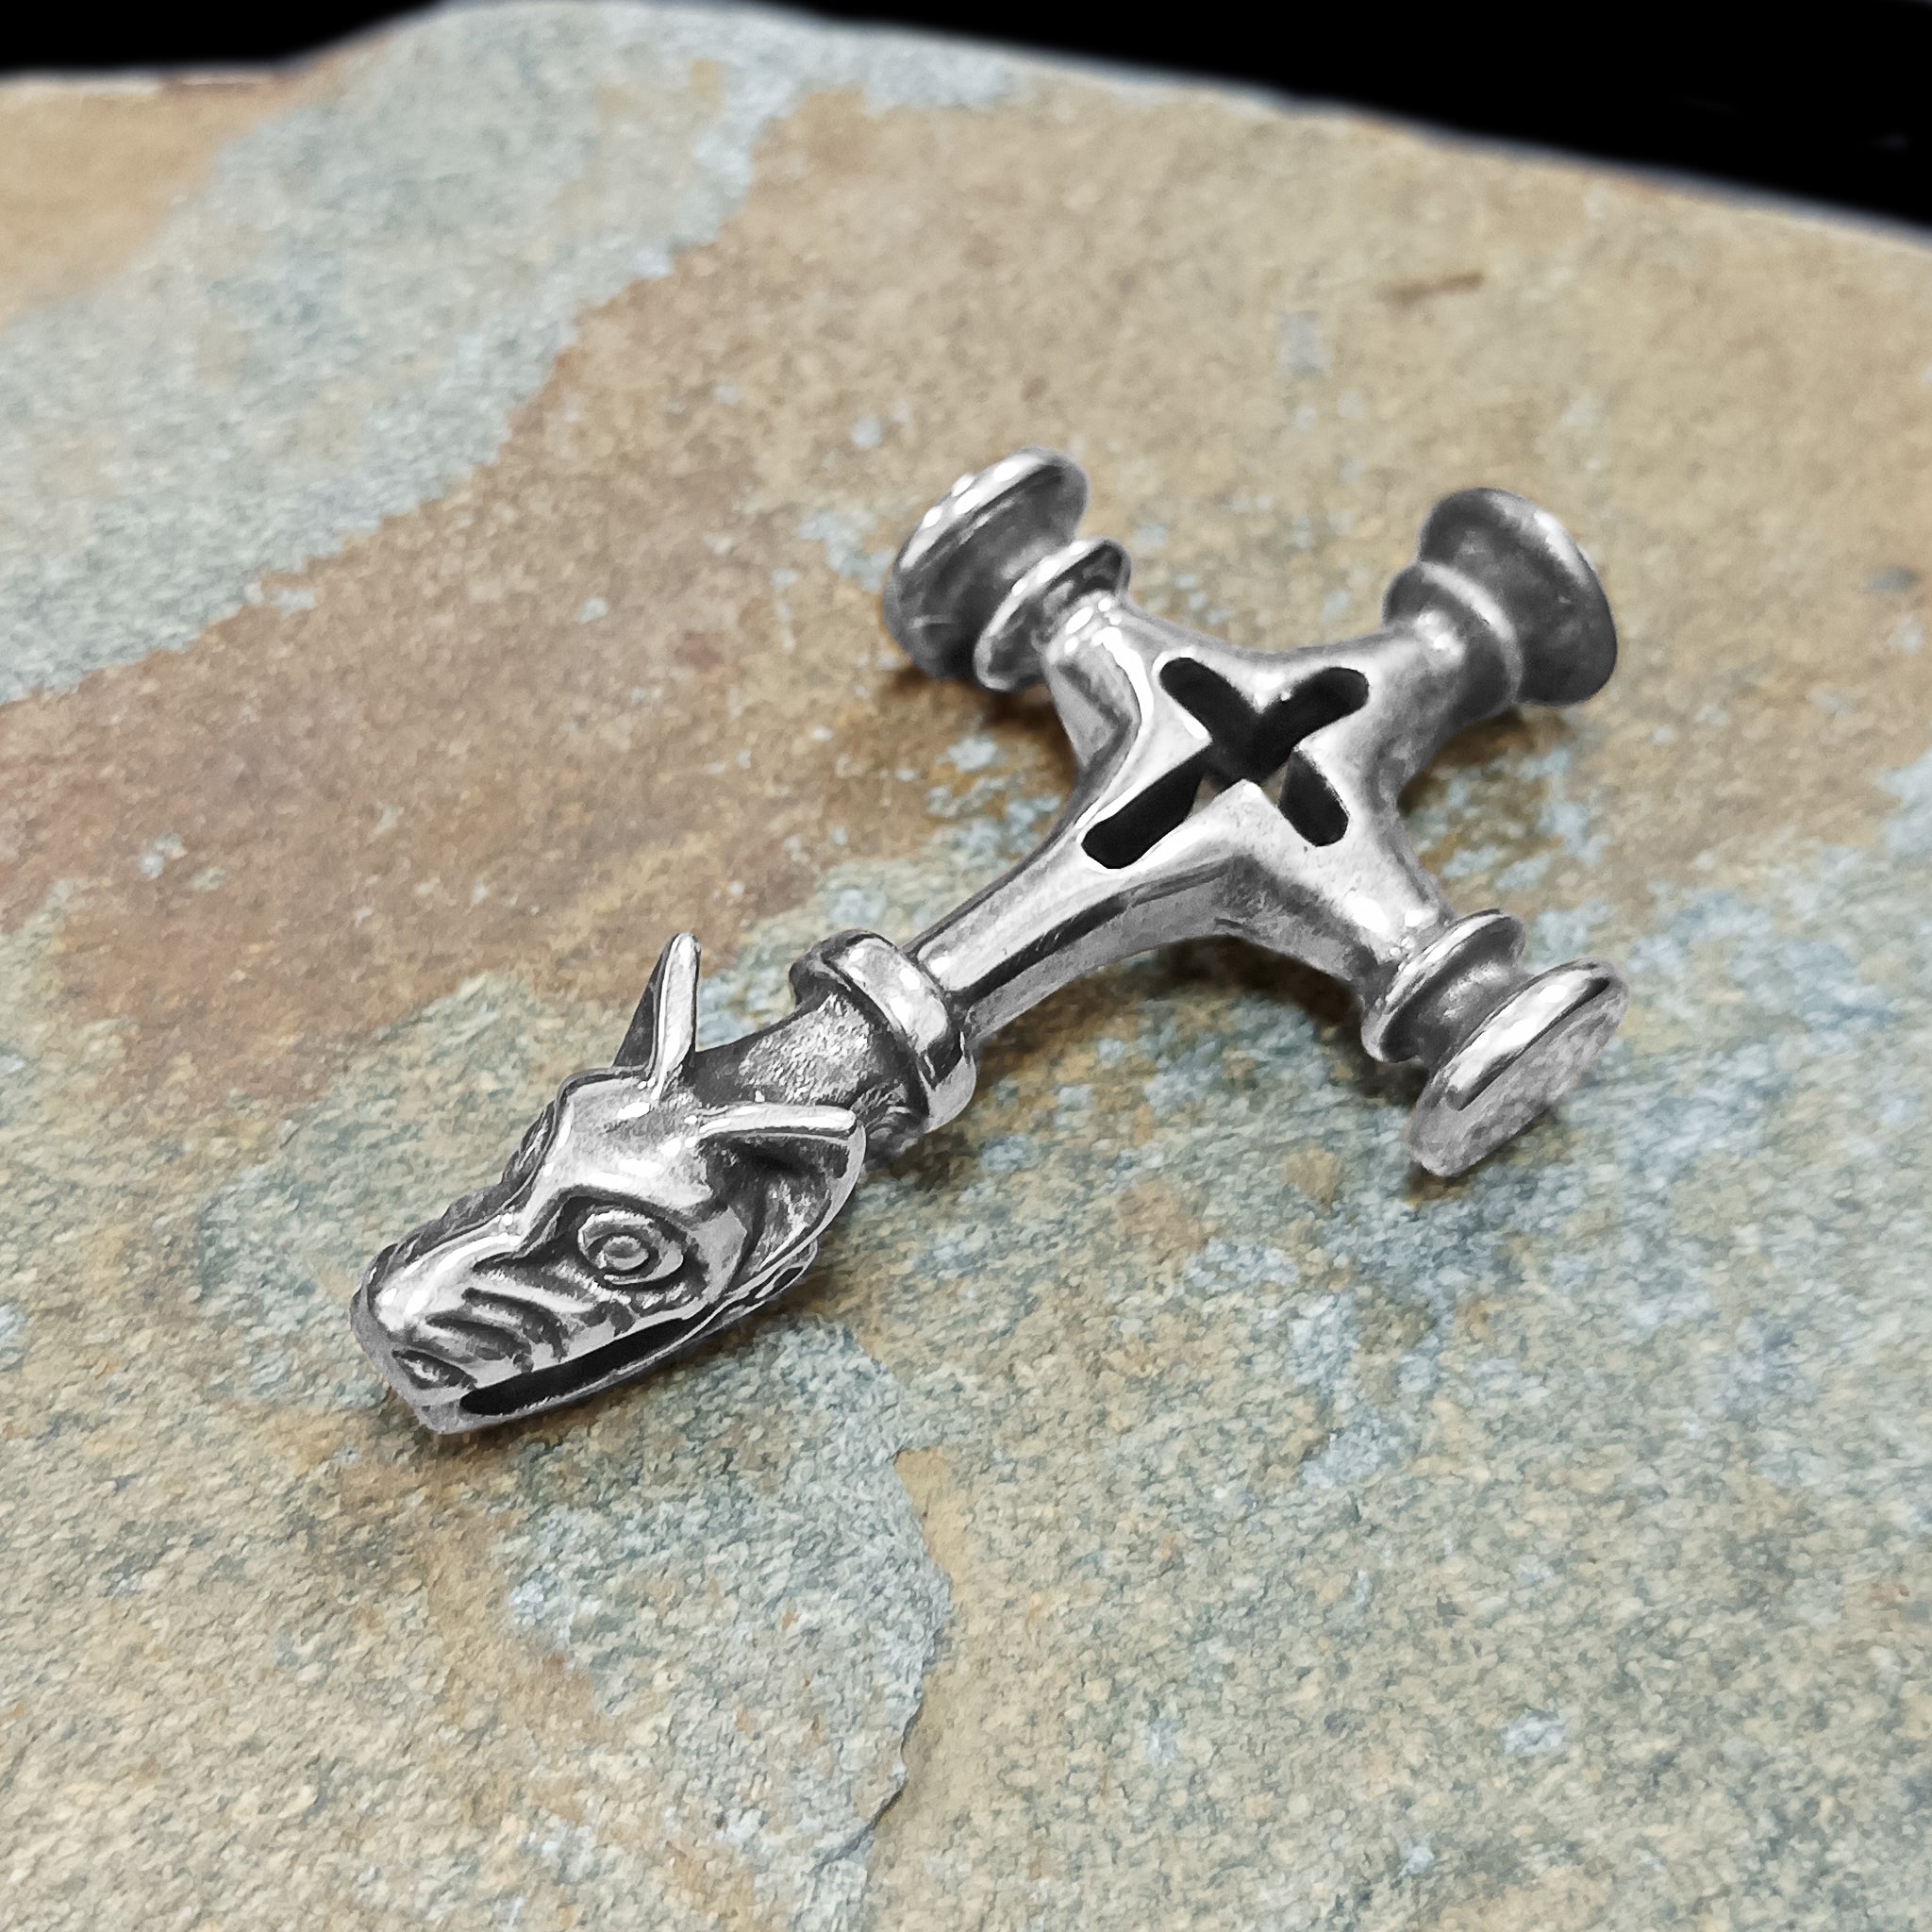 Large Icelandic Wolf Cross Hammer Replica Pendant - Silver - On Rock - Side View